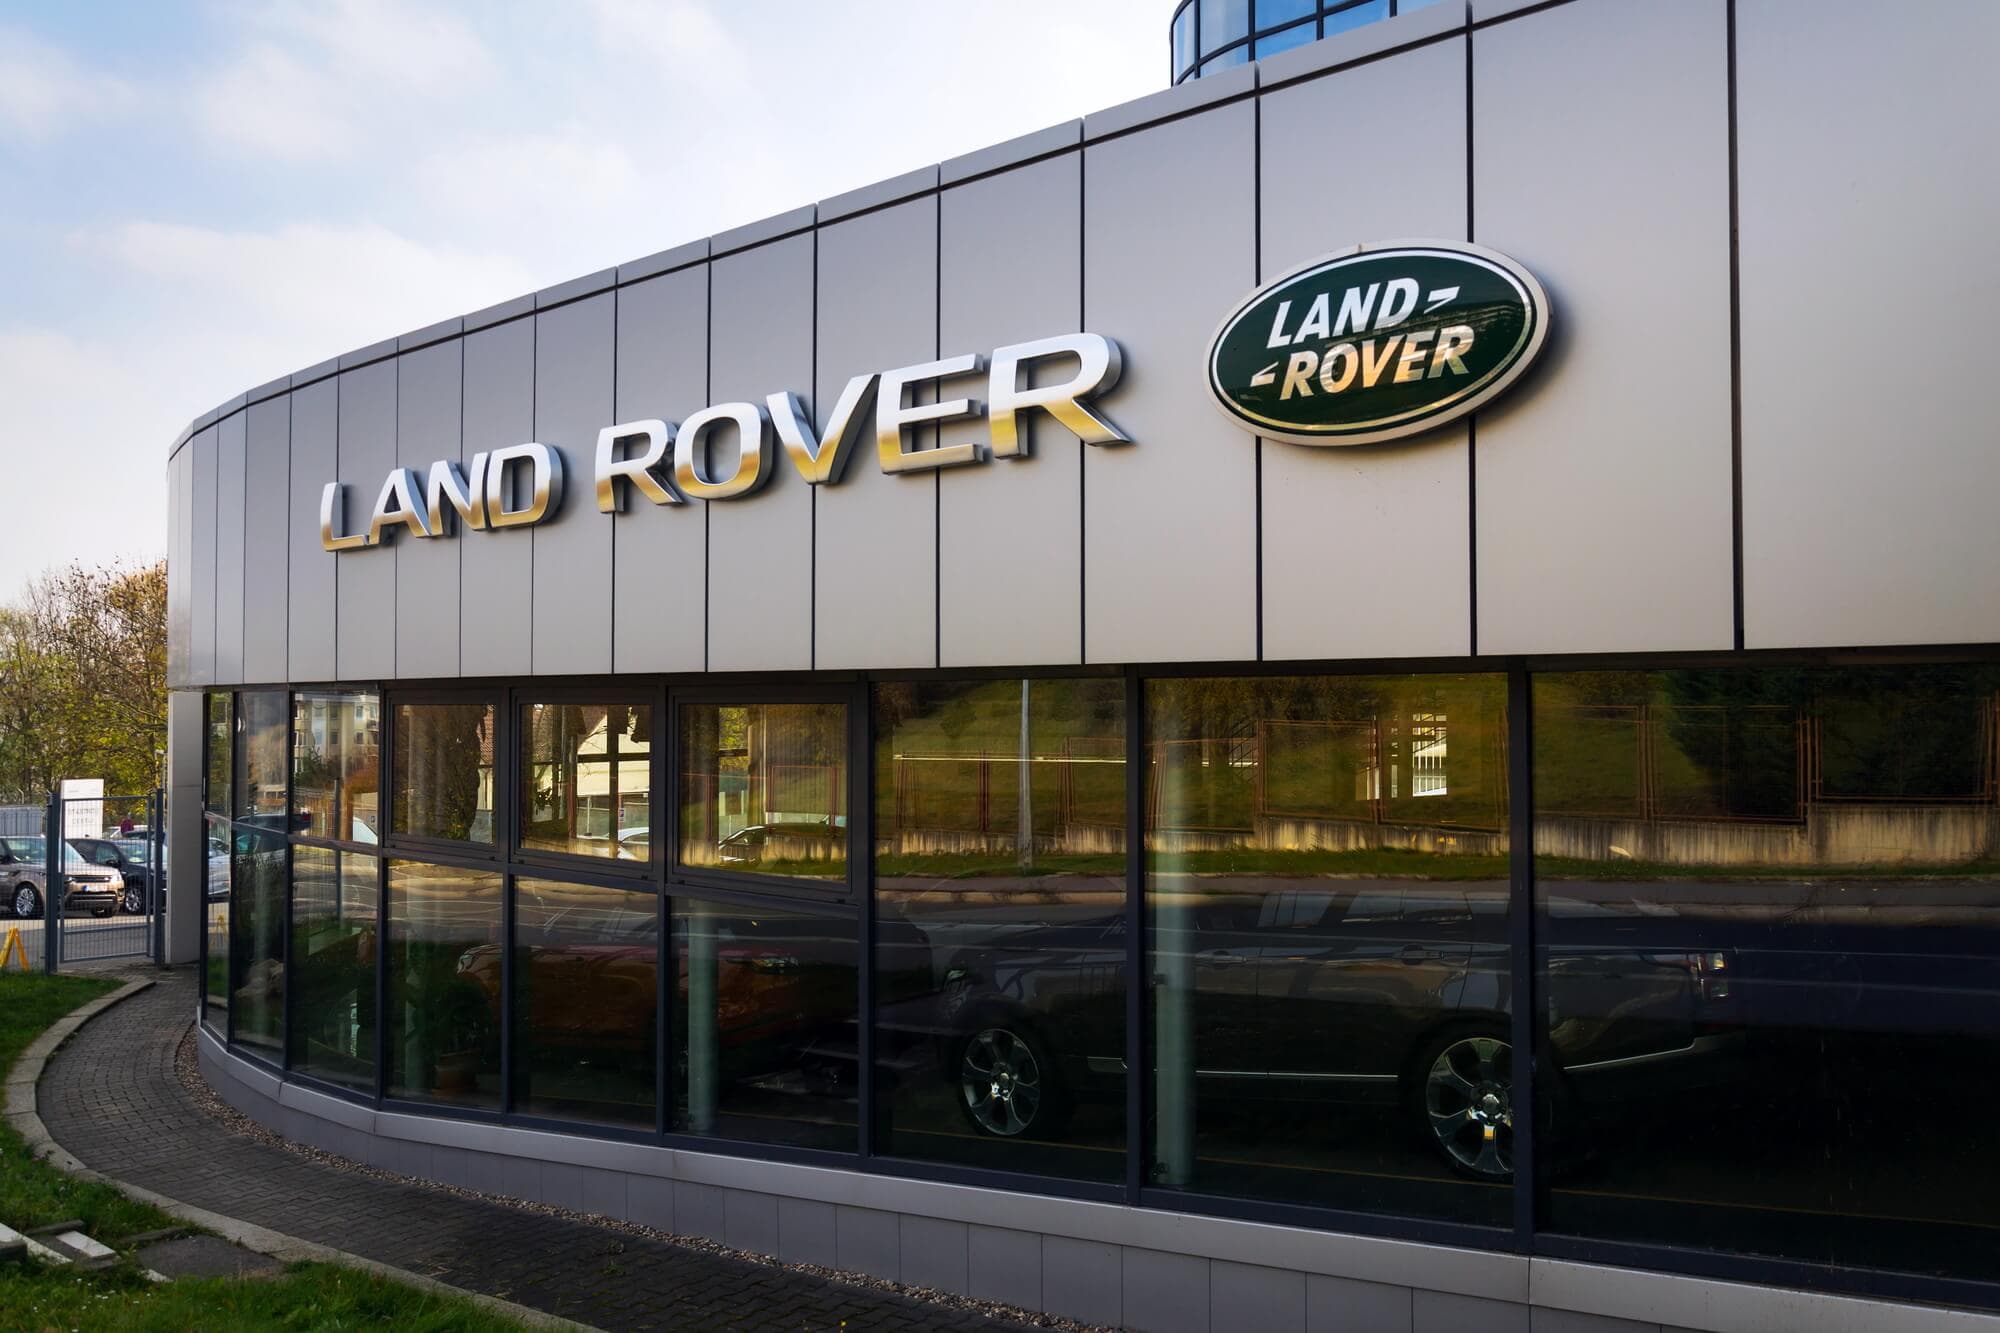 Land Rover’s Extended Warranty: Long-Lasting Benefits